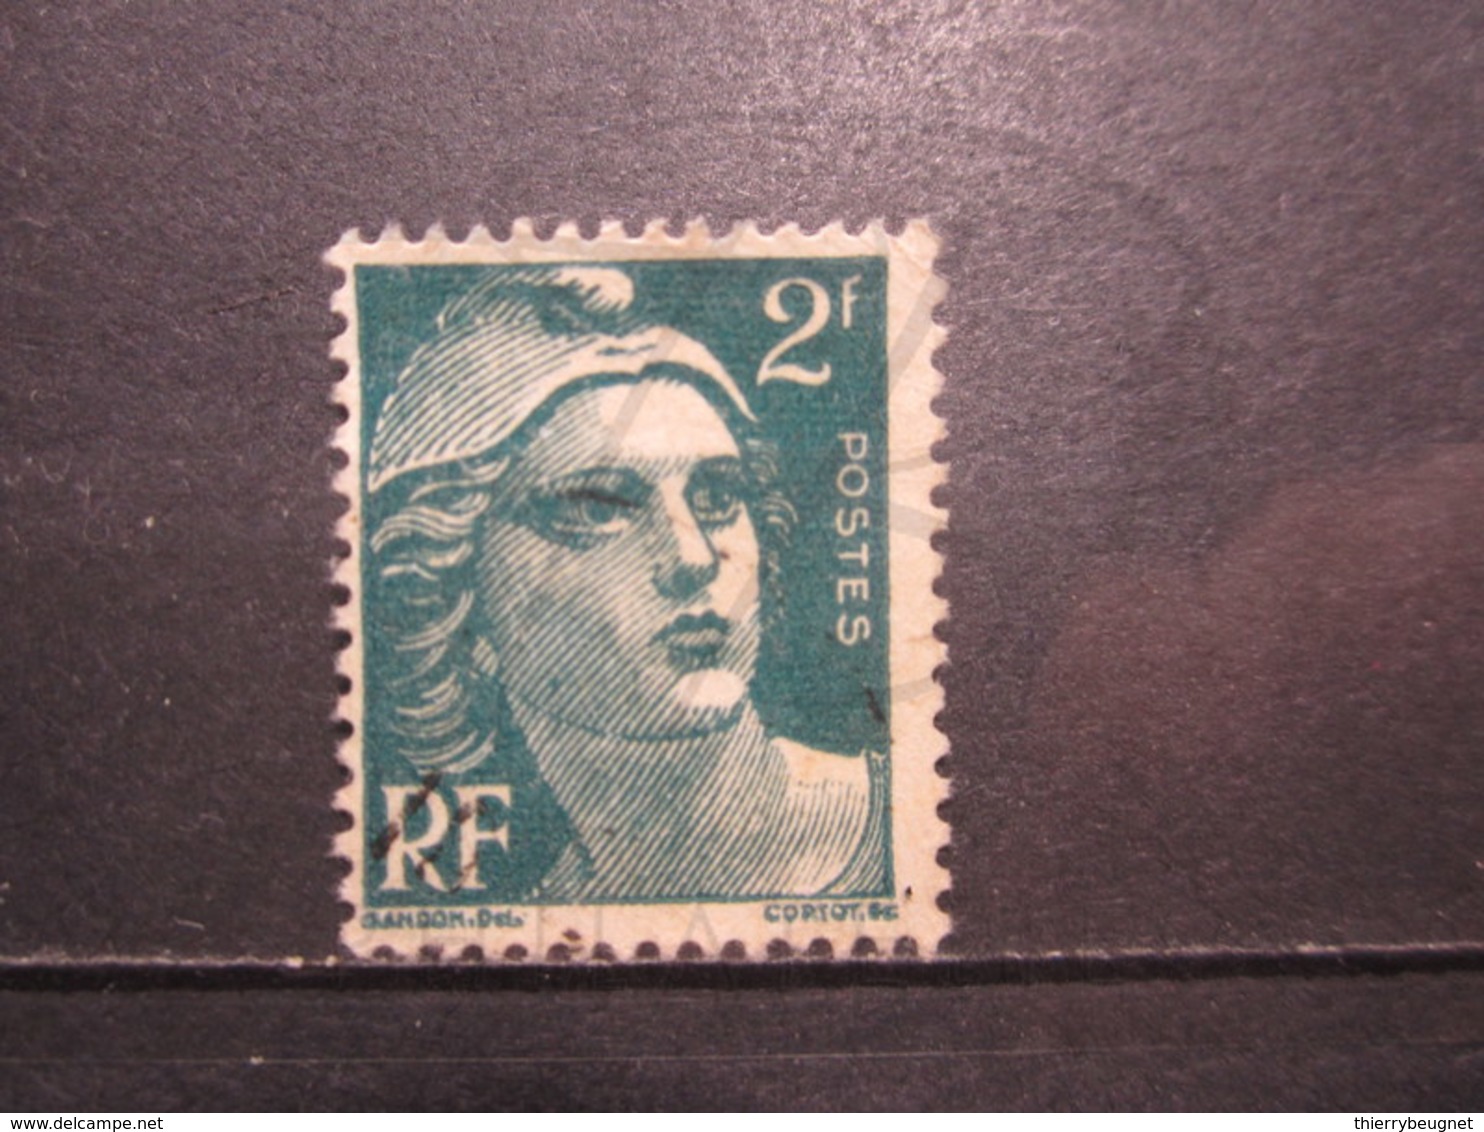 VEND BEAU TIMBRE FRANCE N° 713 , FOND LIGNE !!! (m) - Used Stamps